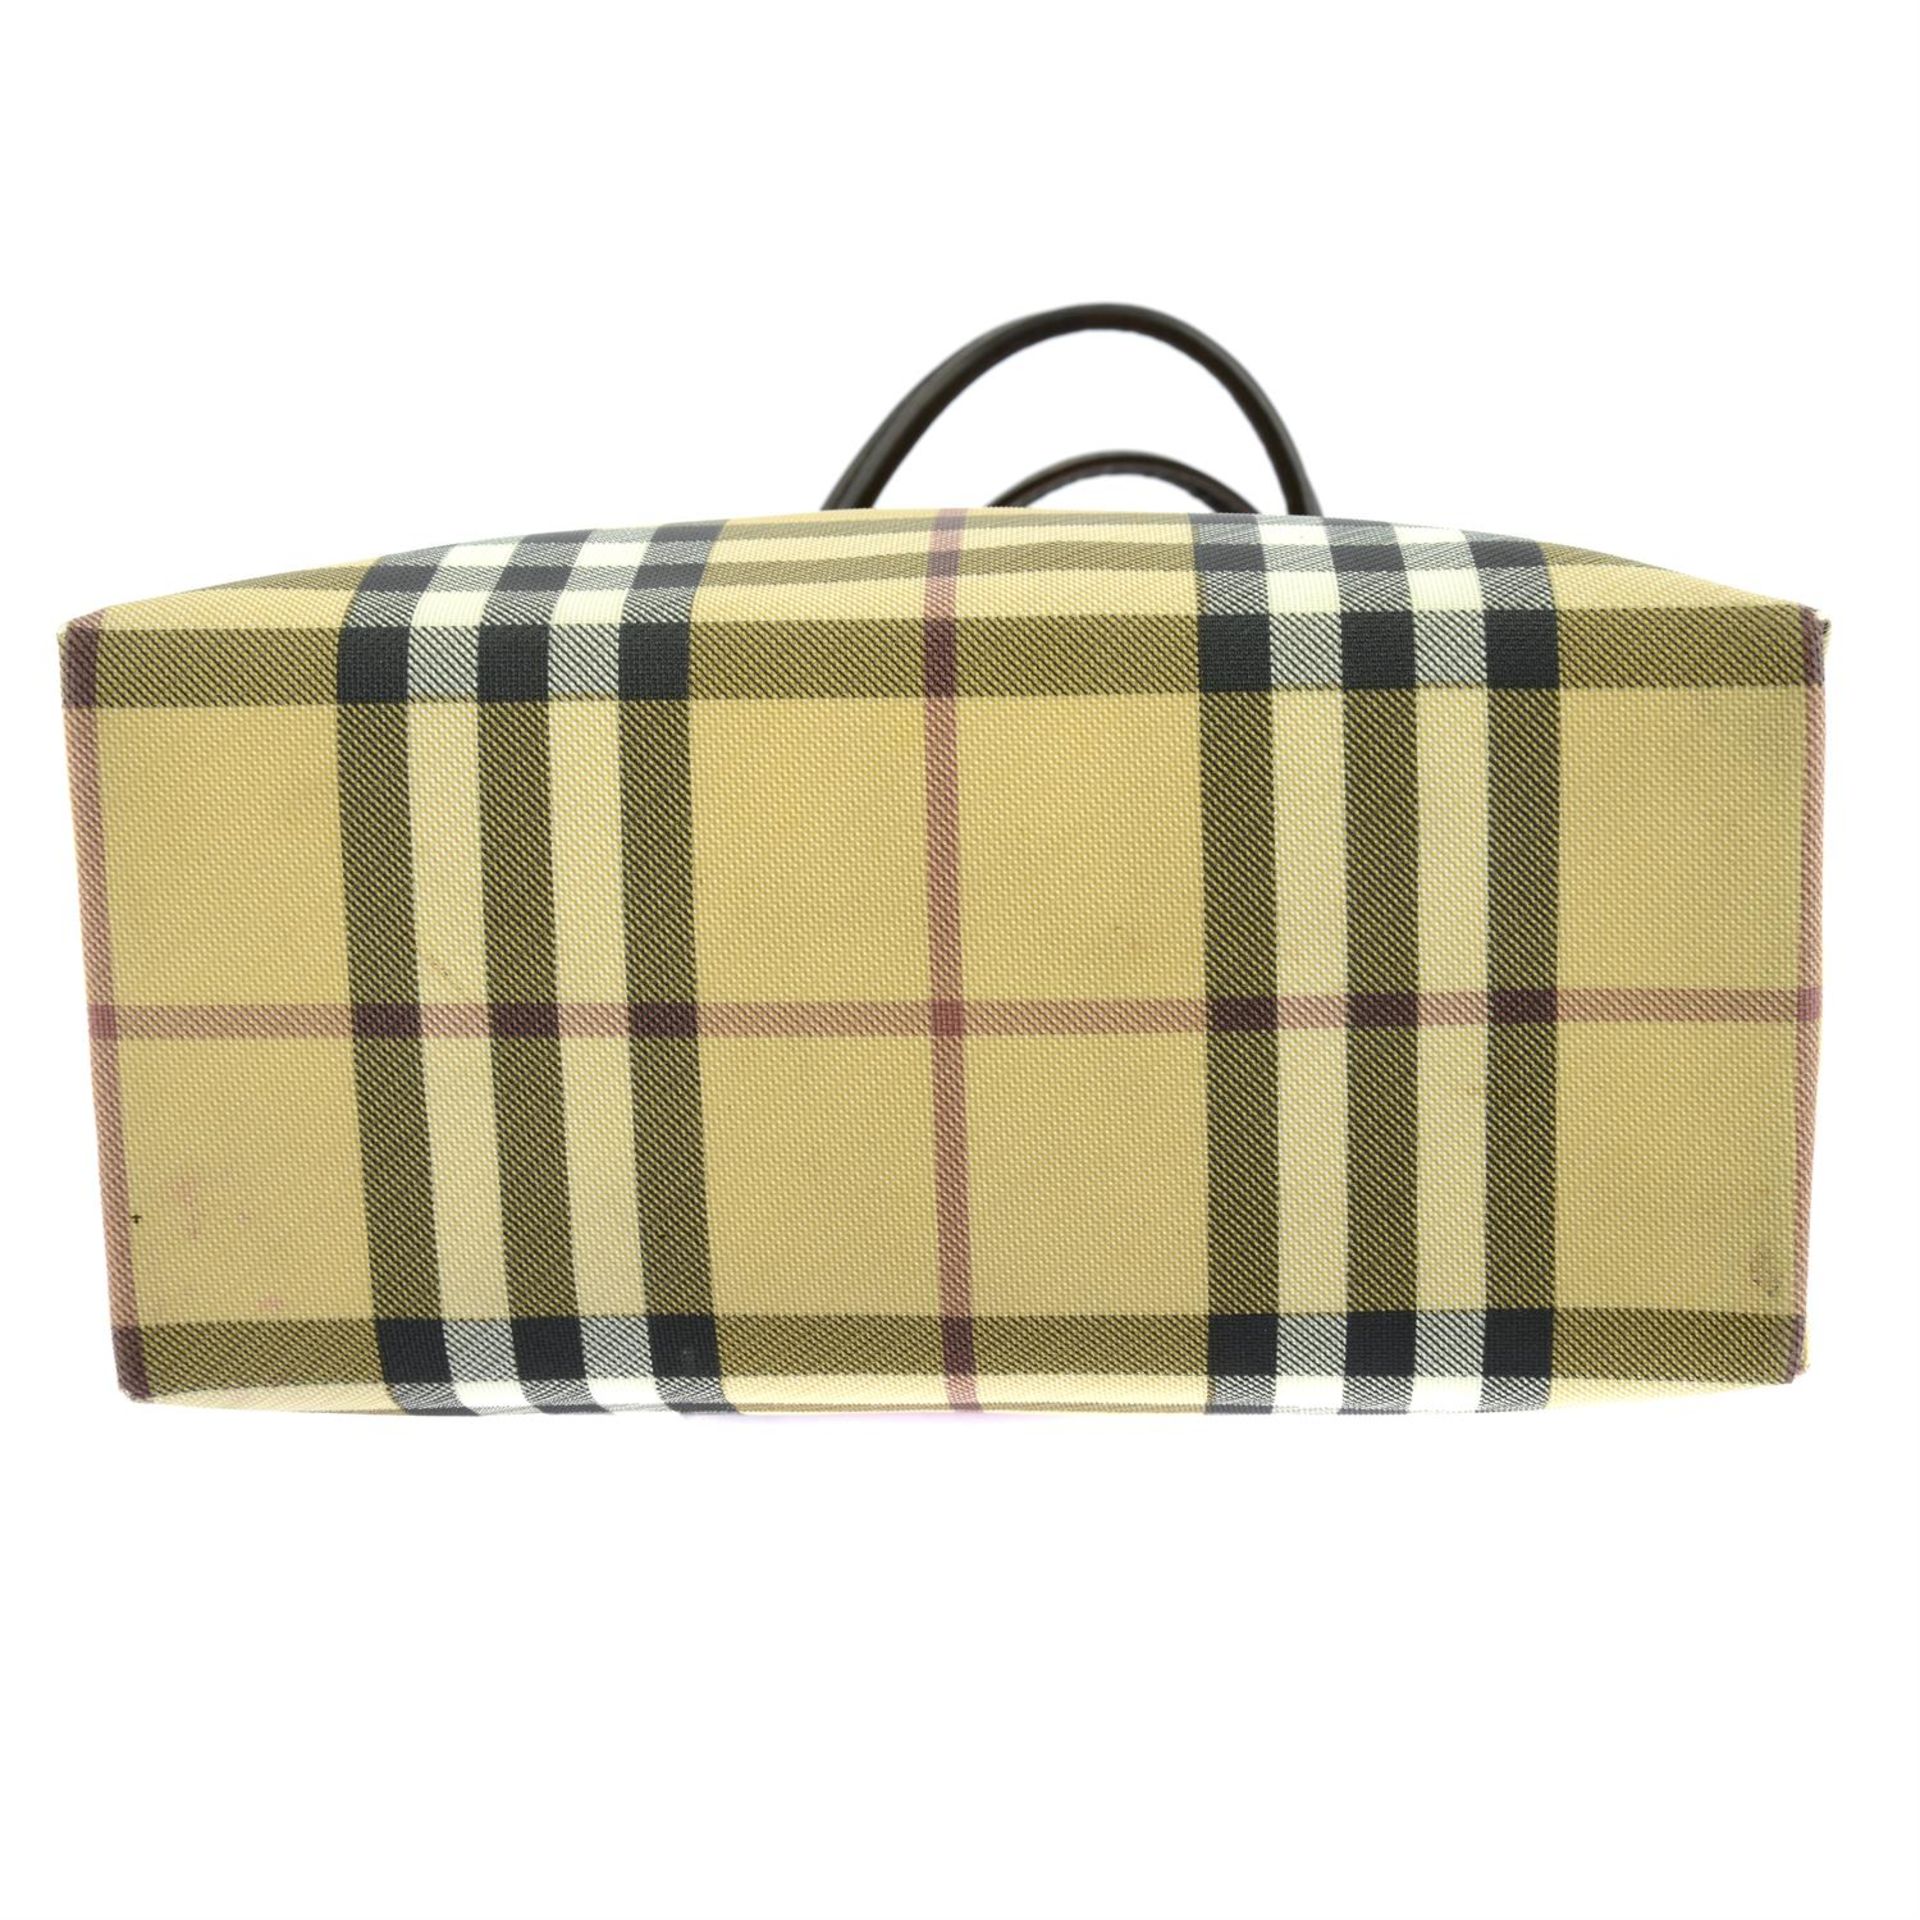 BURBERRY - a Nova check mini shopping tote with matching coin purse. - Image 4 of 6